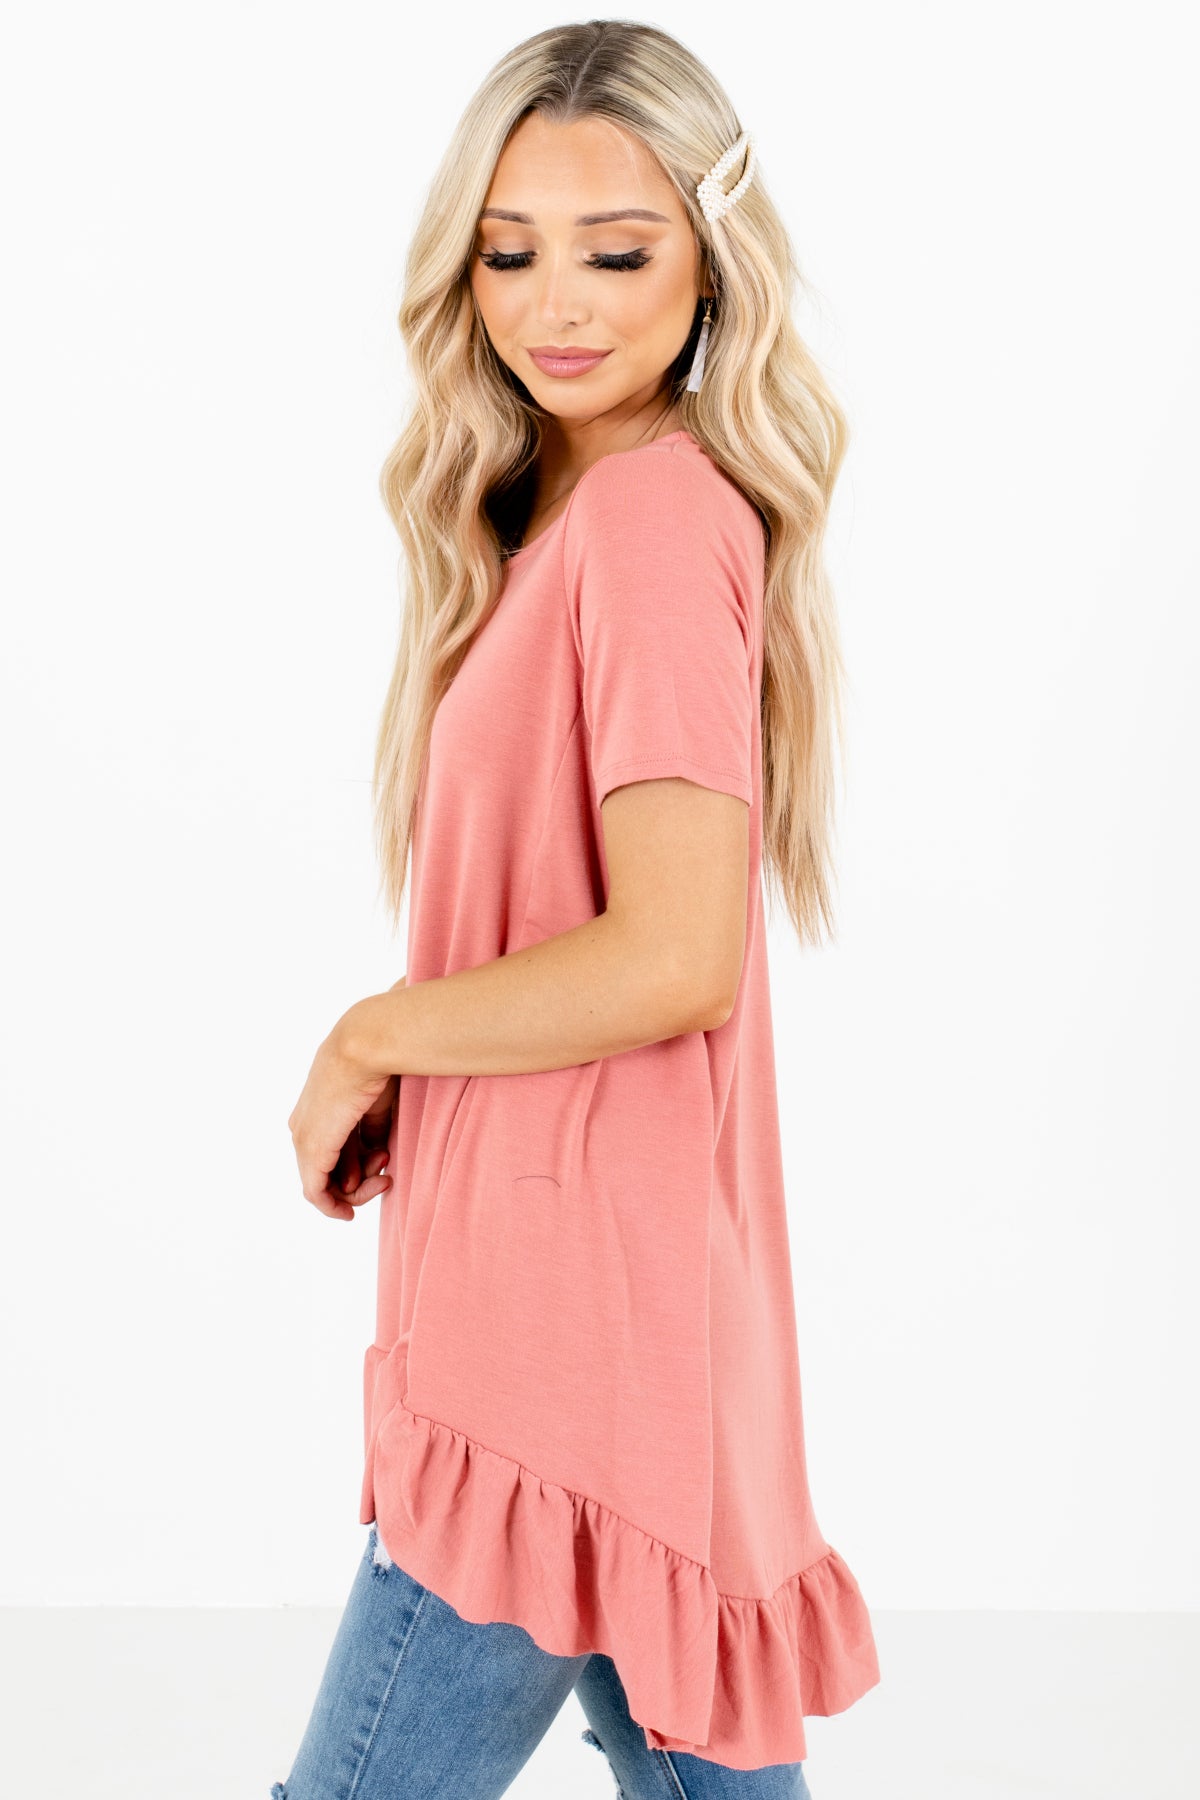 Casual Obsession Peplum Top